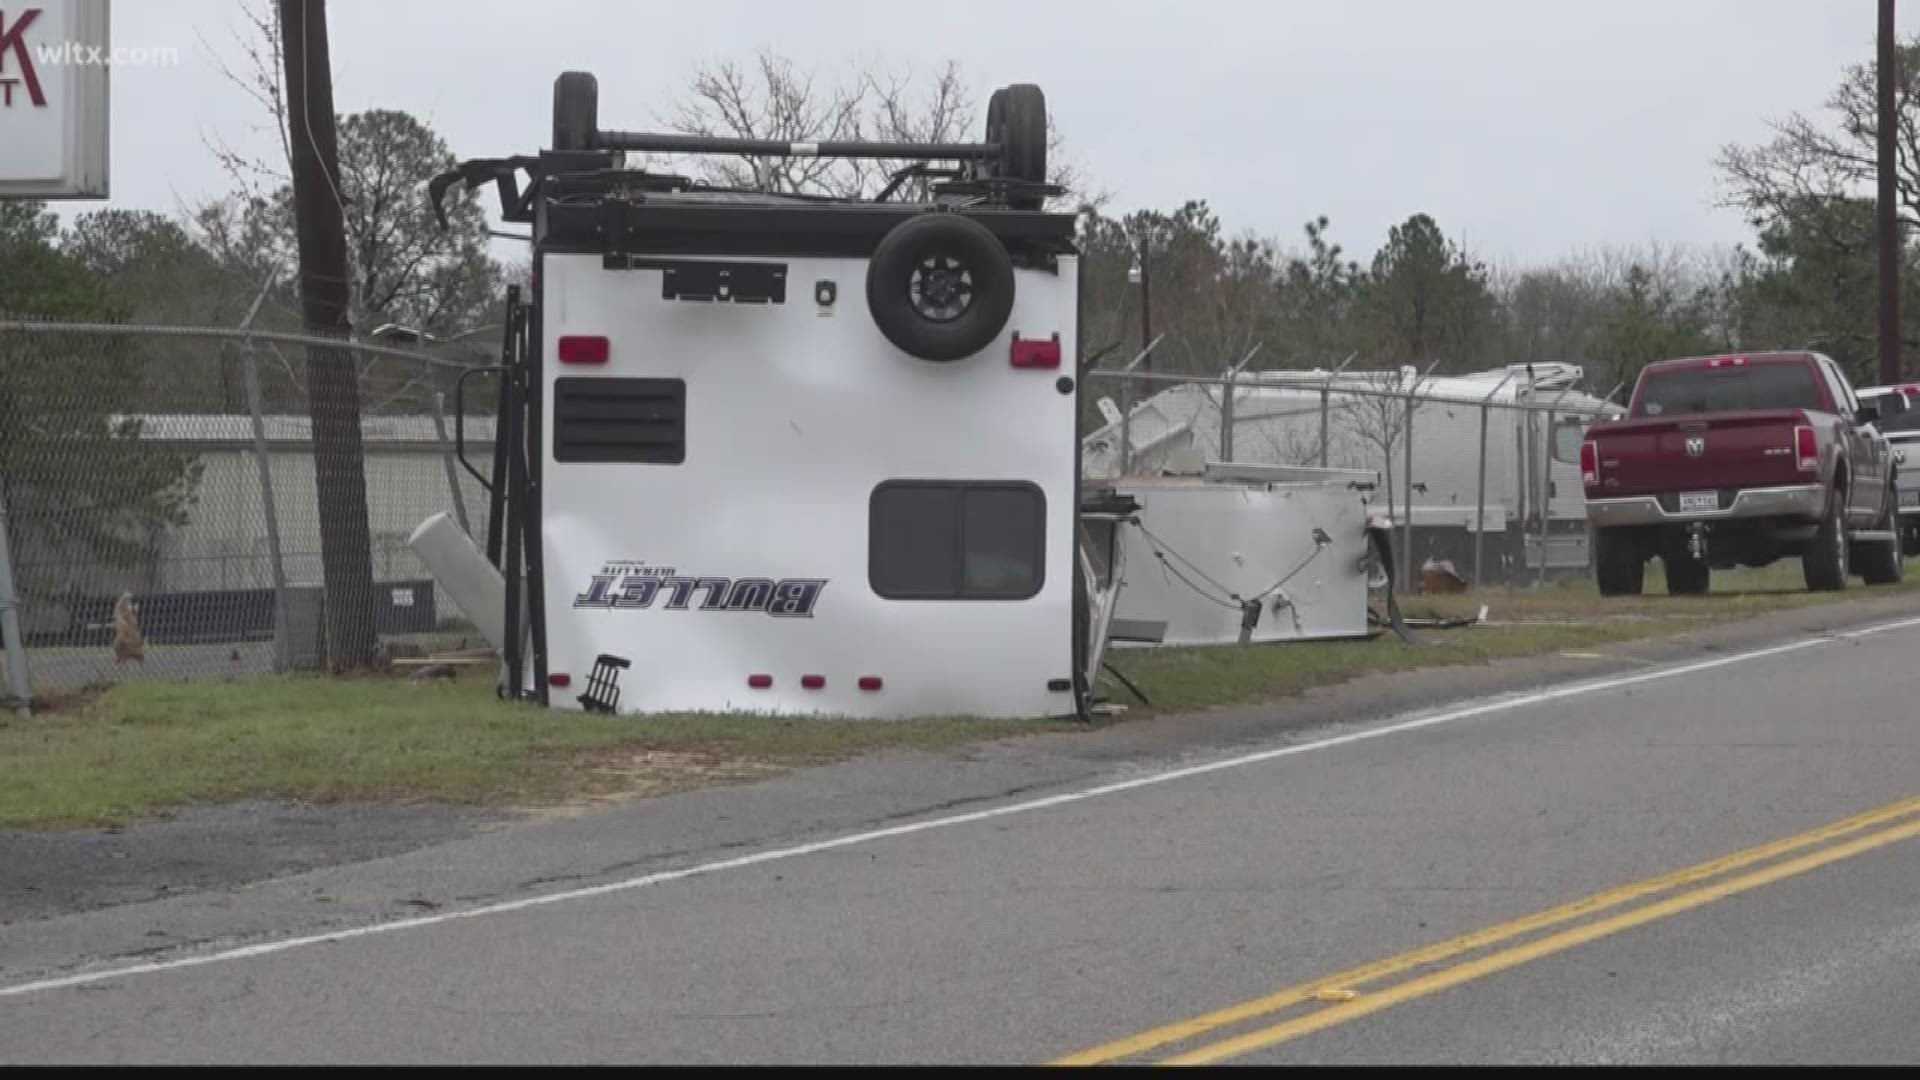 An RV store owner in Lexington, SC says at least 10 of his vehicles were damaged by what appears to be a tornado.